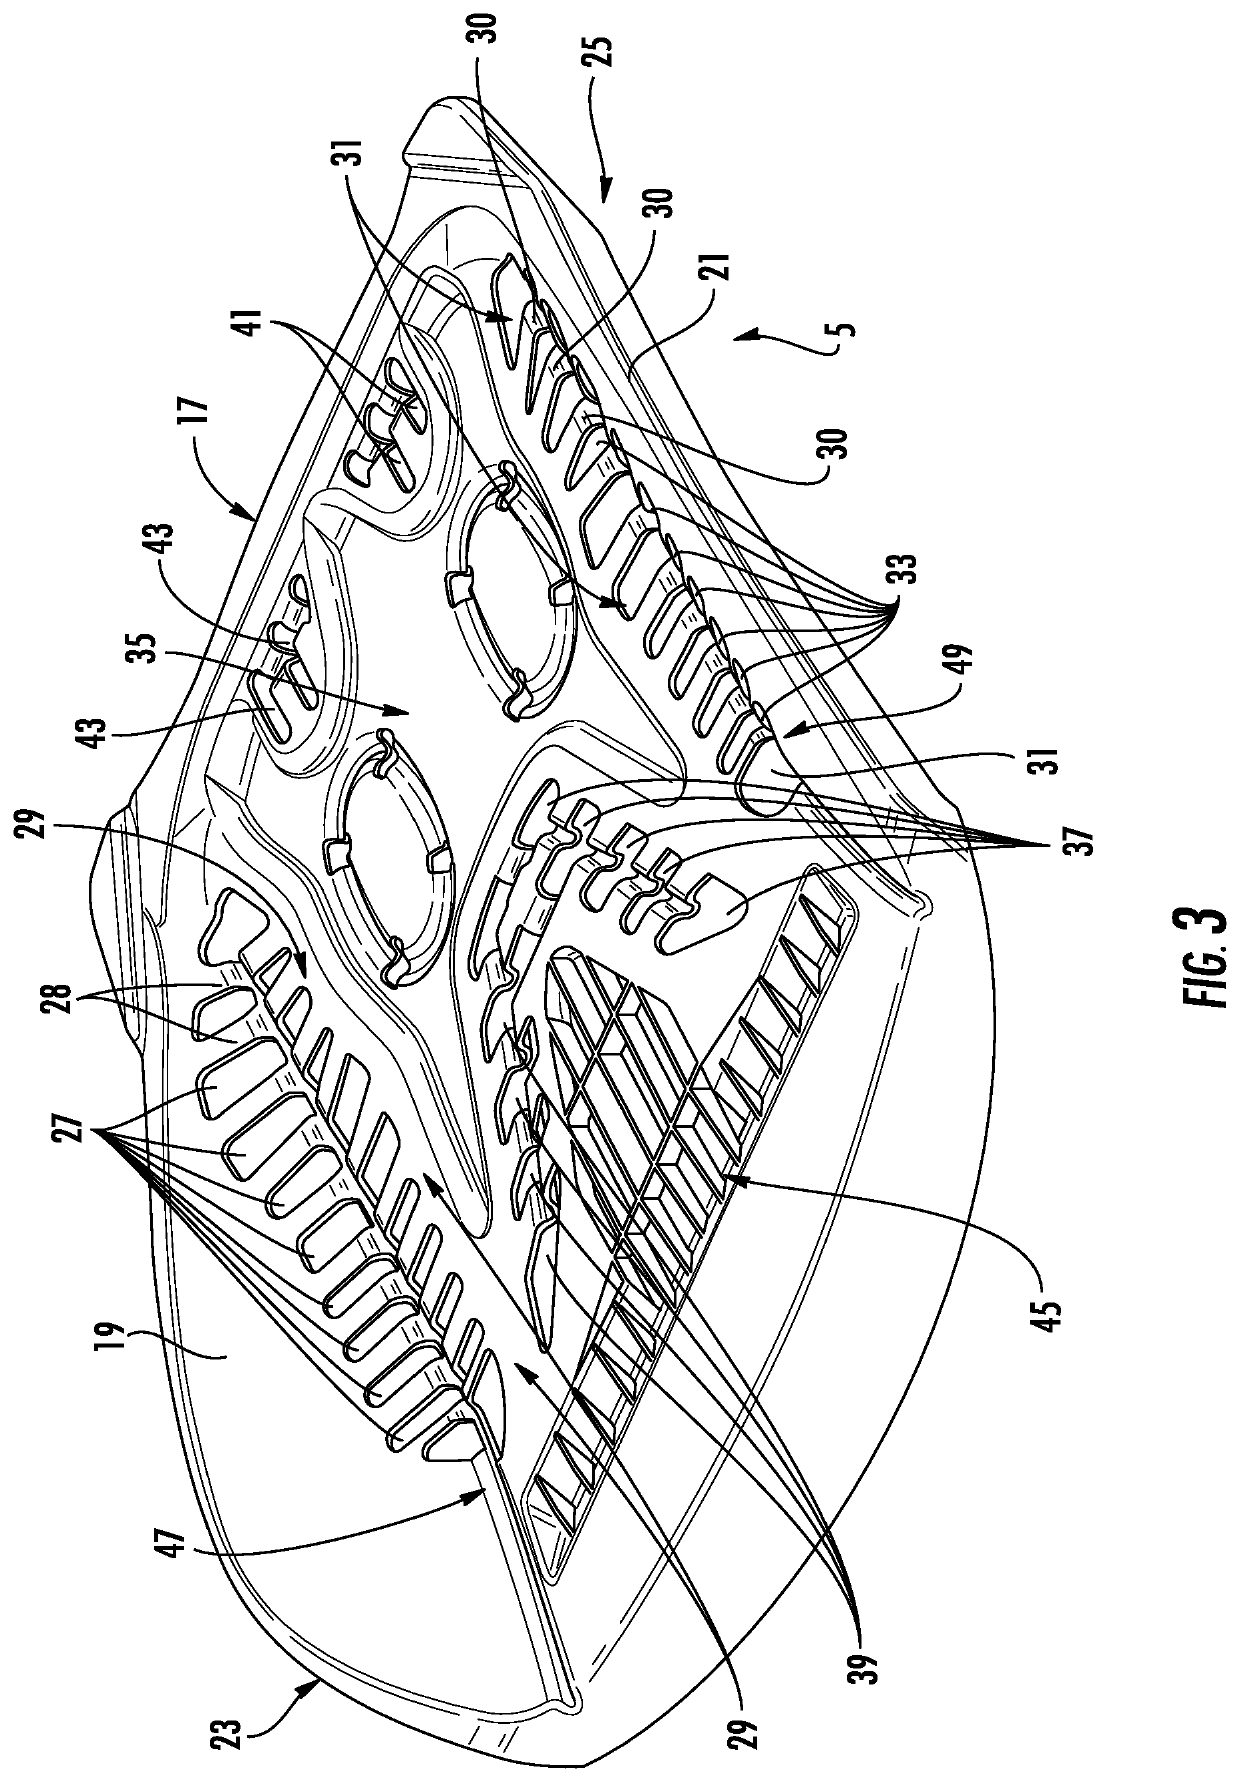 Seat support structure and a seat structure including the seat support structure